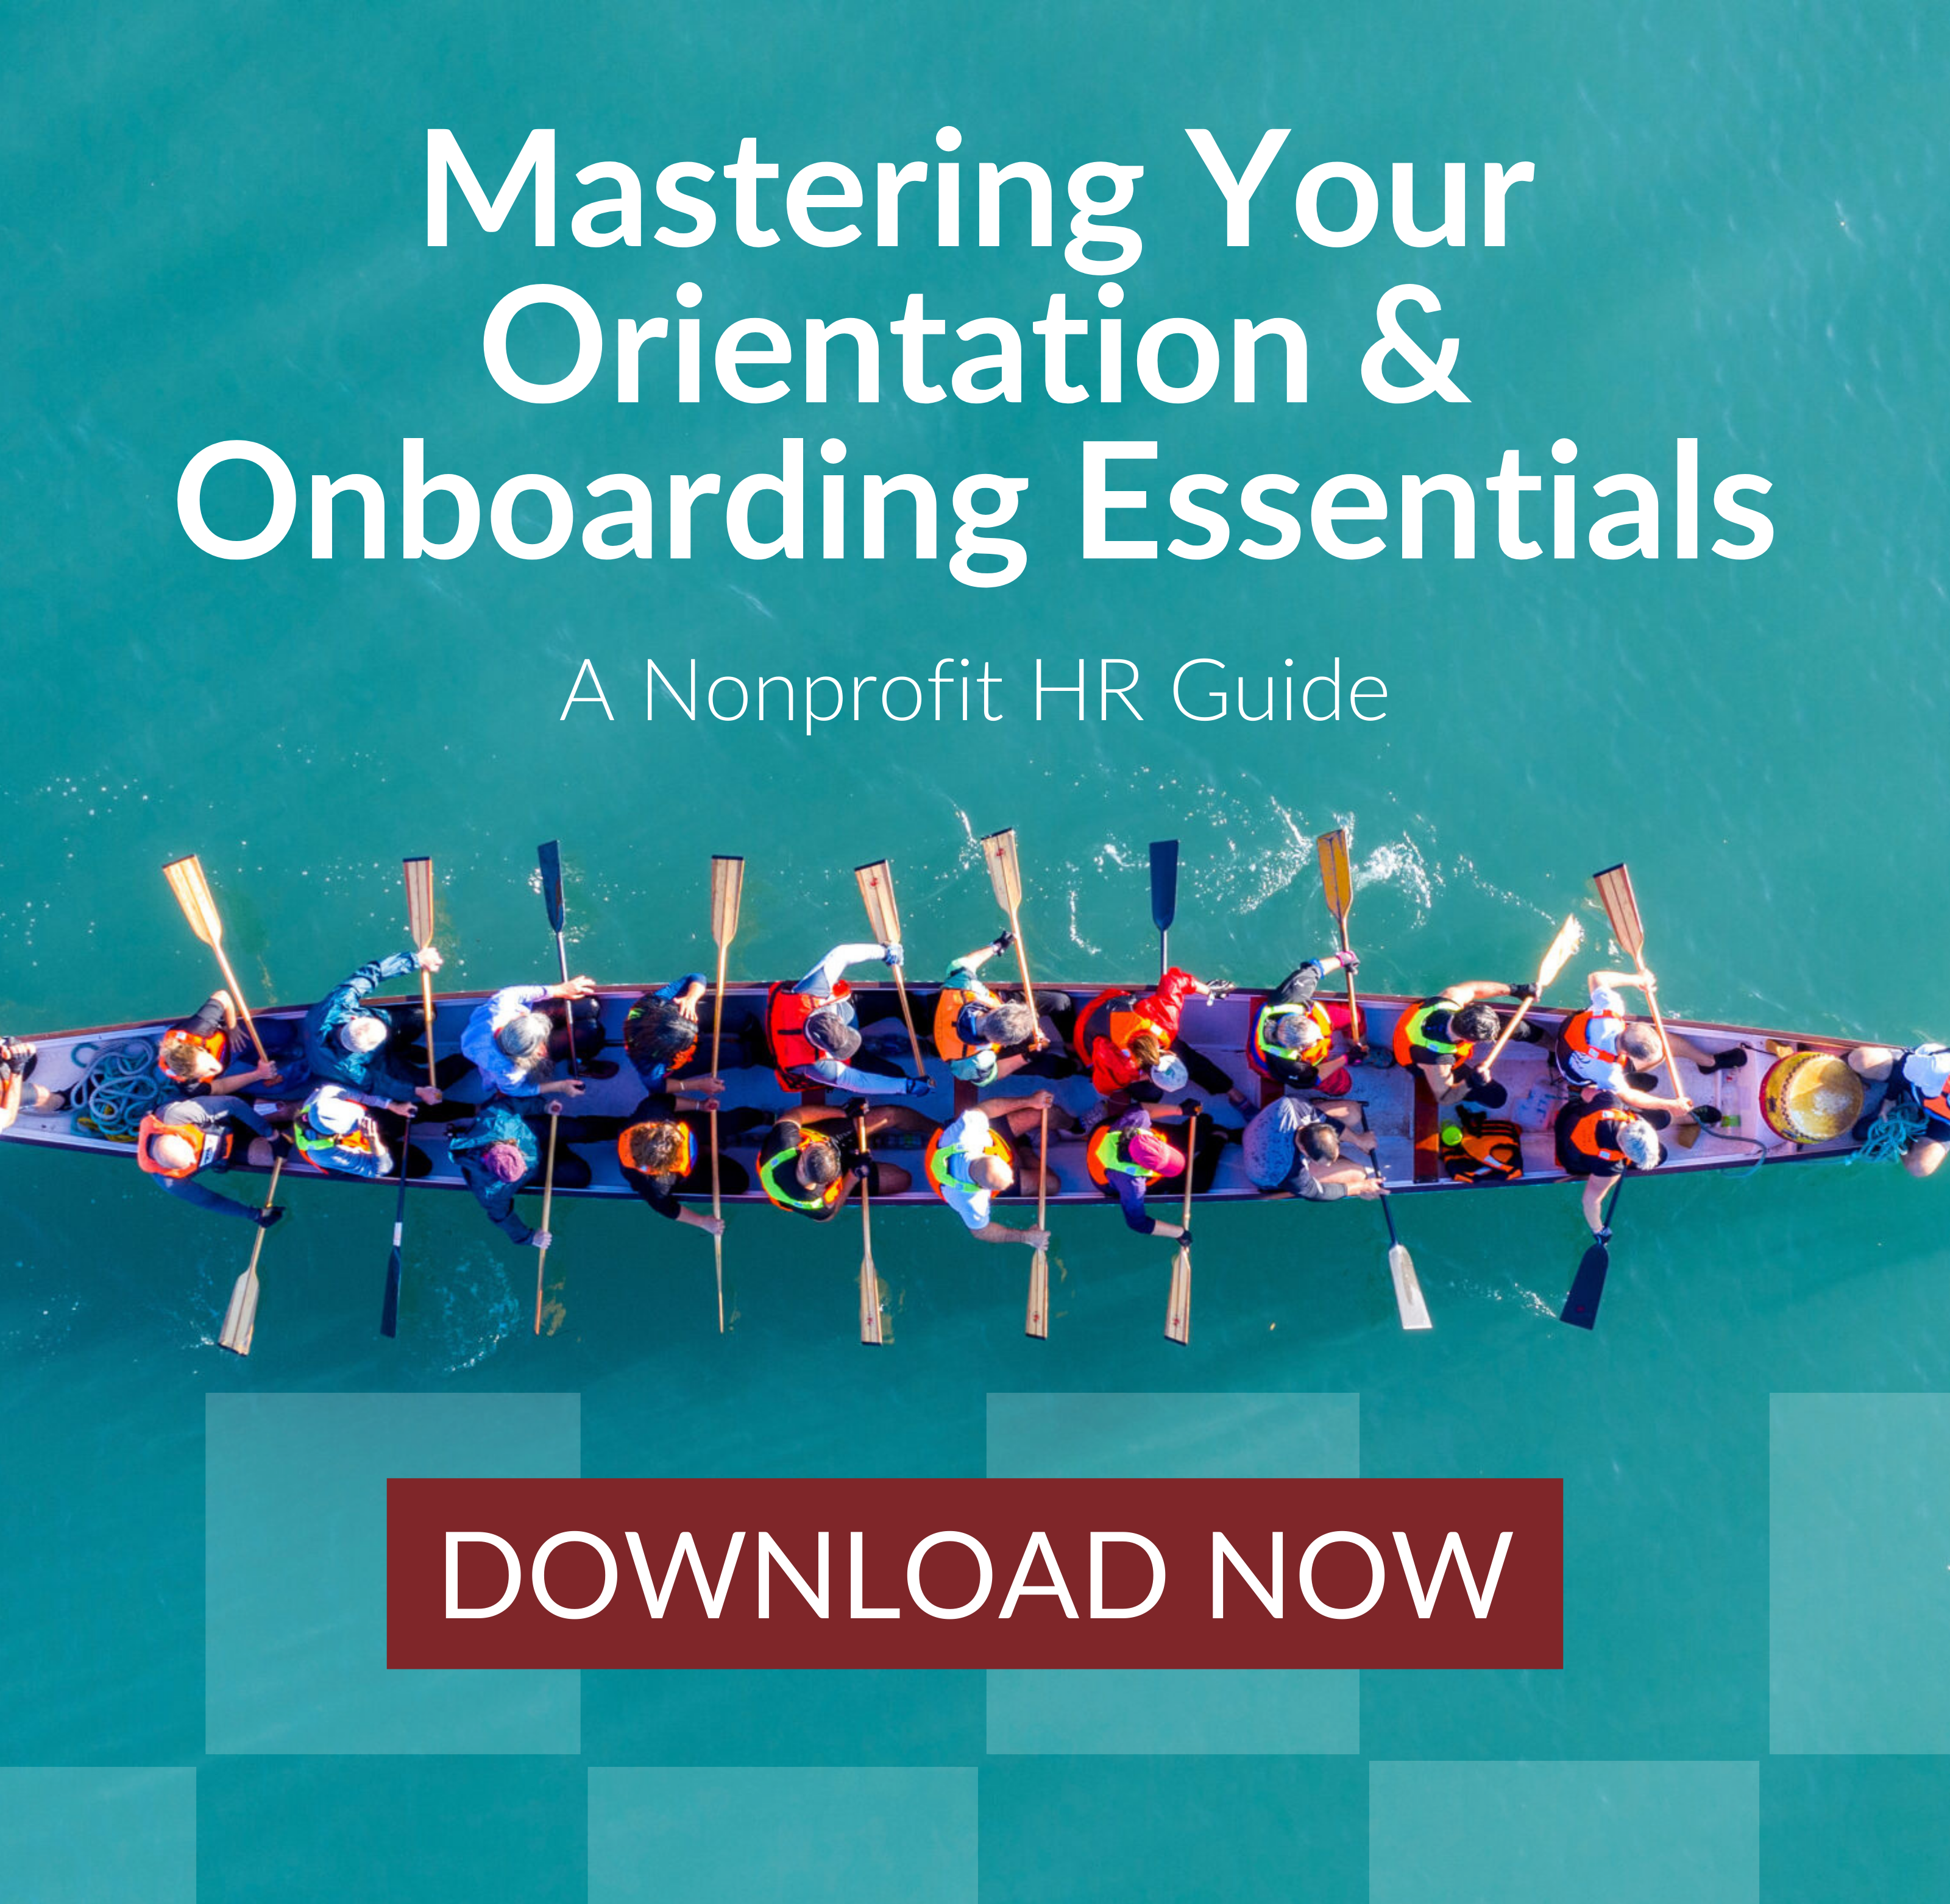 Mastering Your Onboarding & Orientation Essentials: A Nonprofit HR Guide. Download Now. 